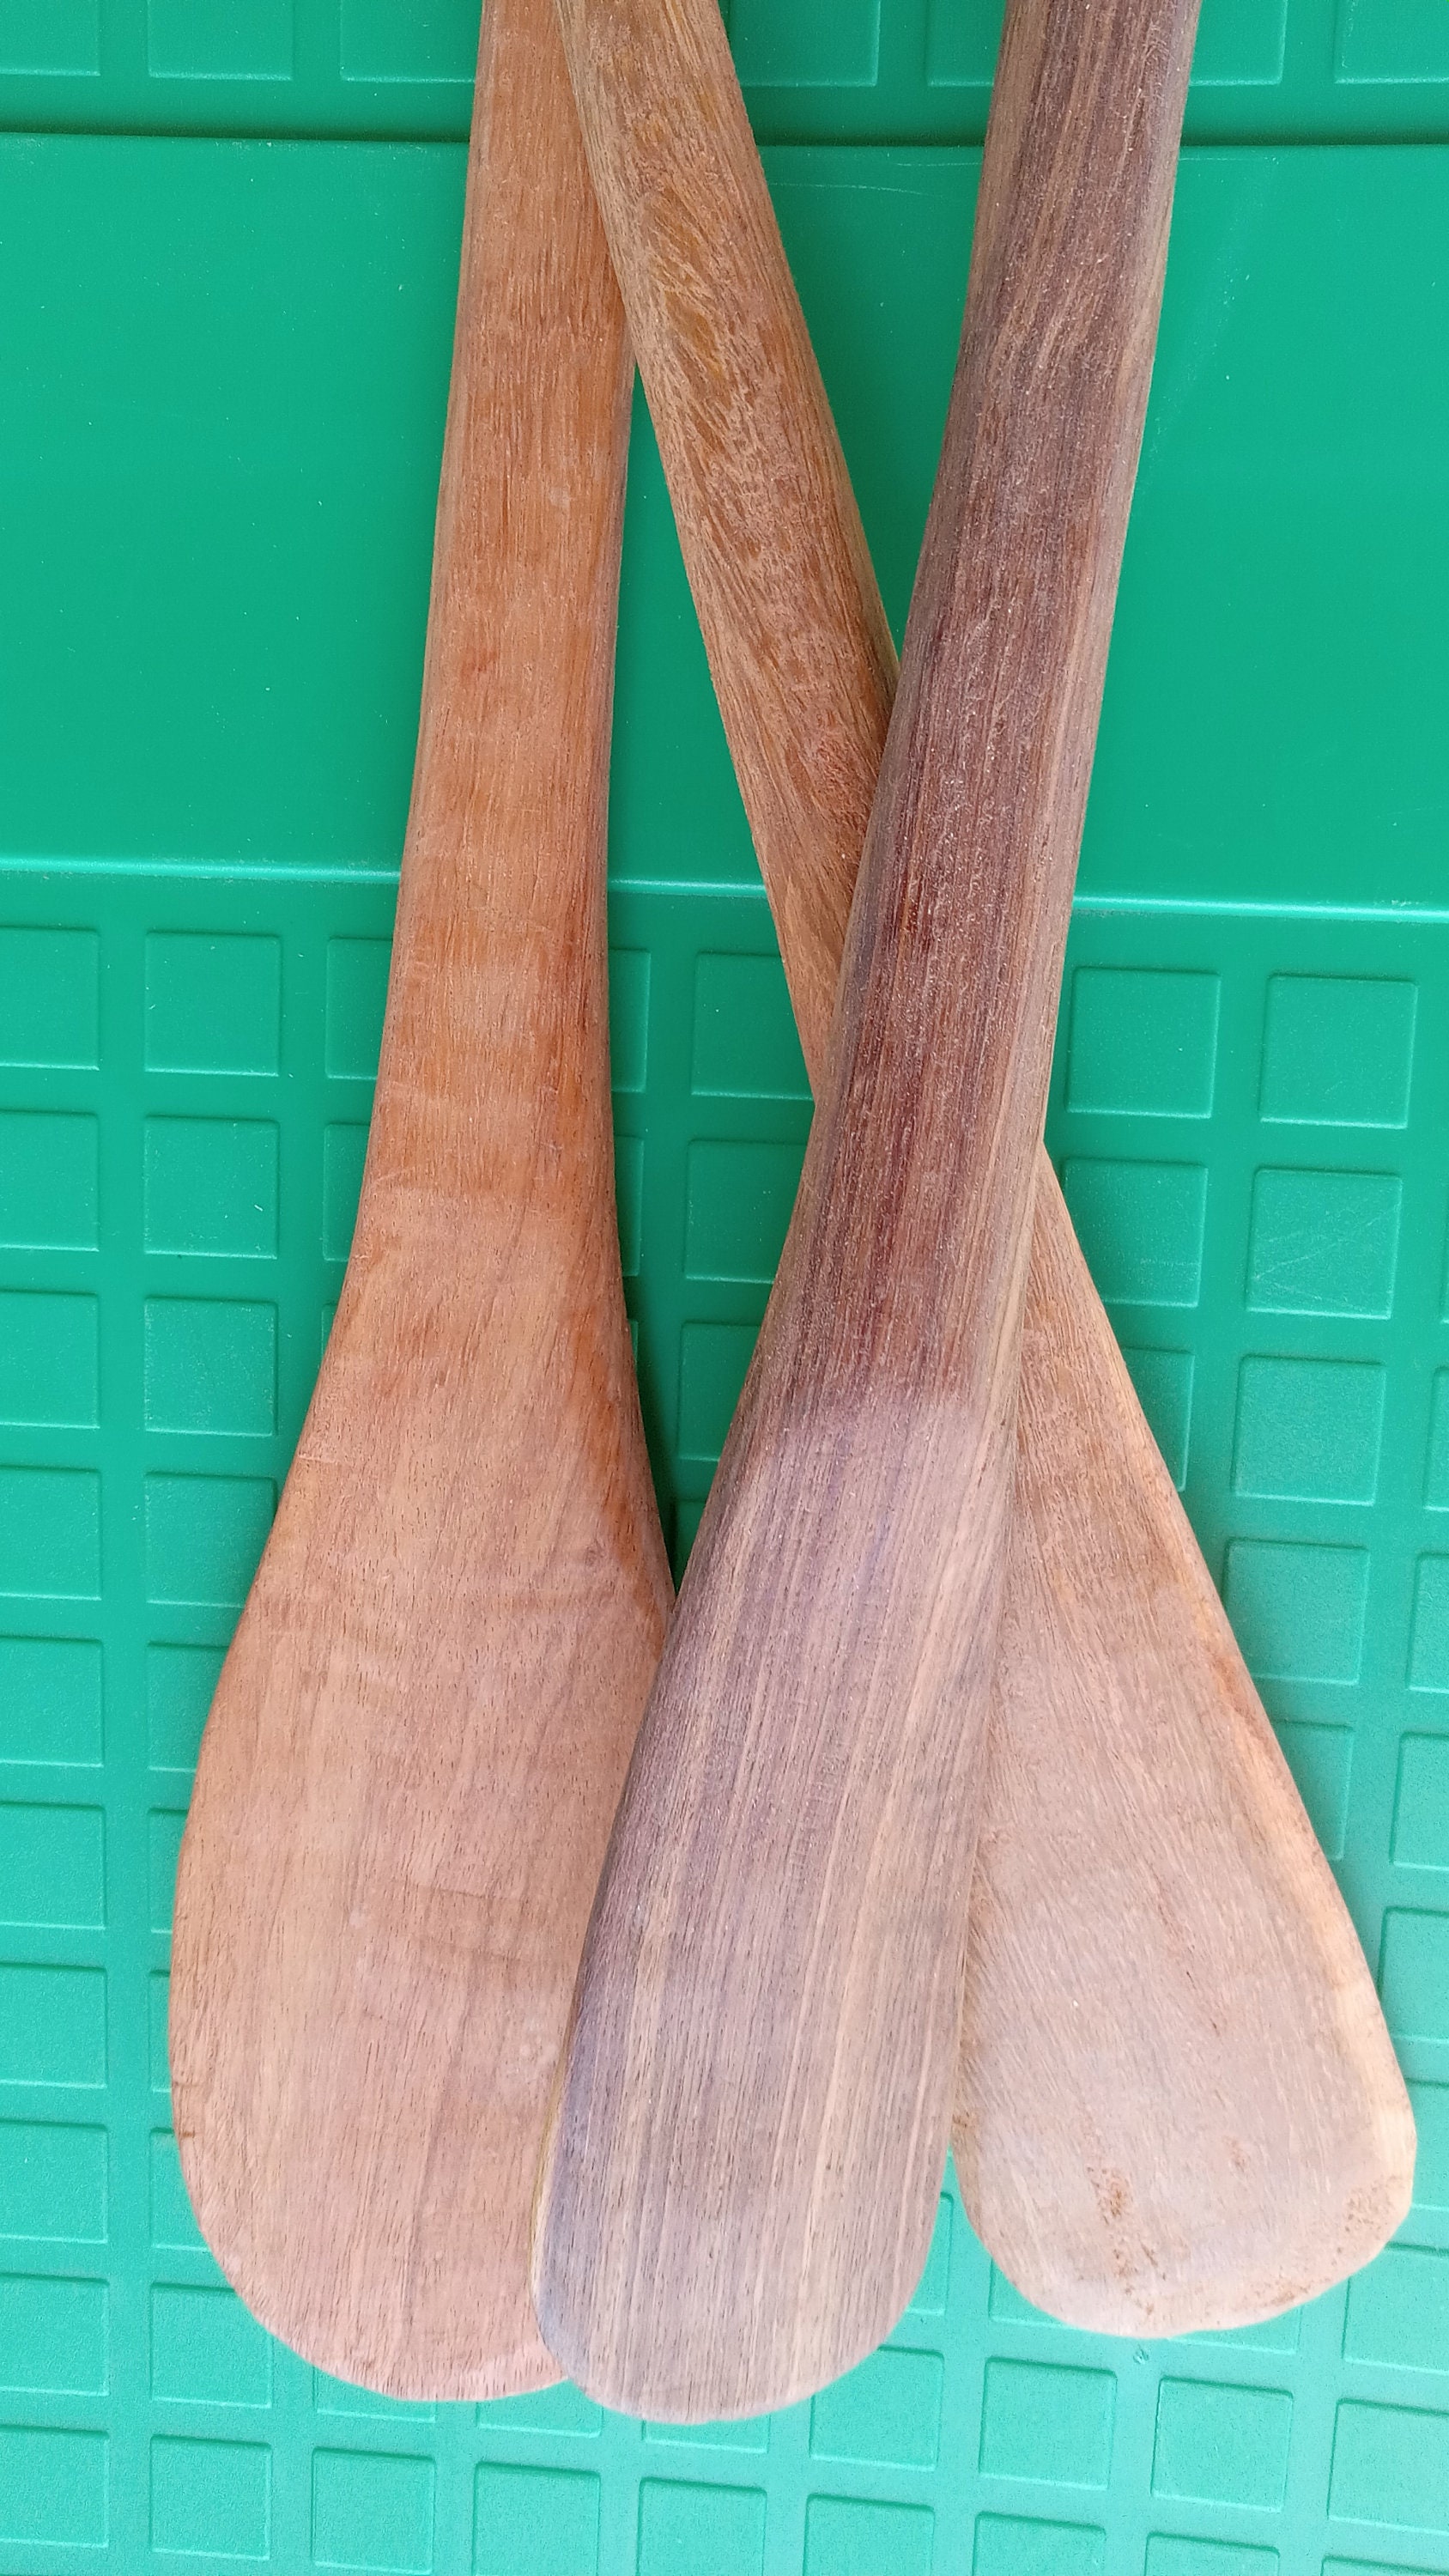 Traditional Handmade Wooden Paddle, Fufu Sticks for Mixing Foods